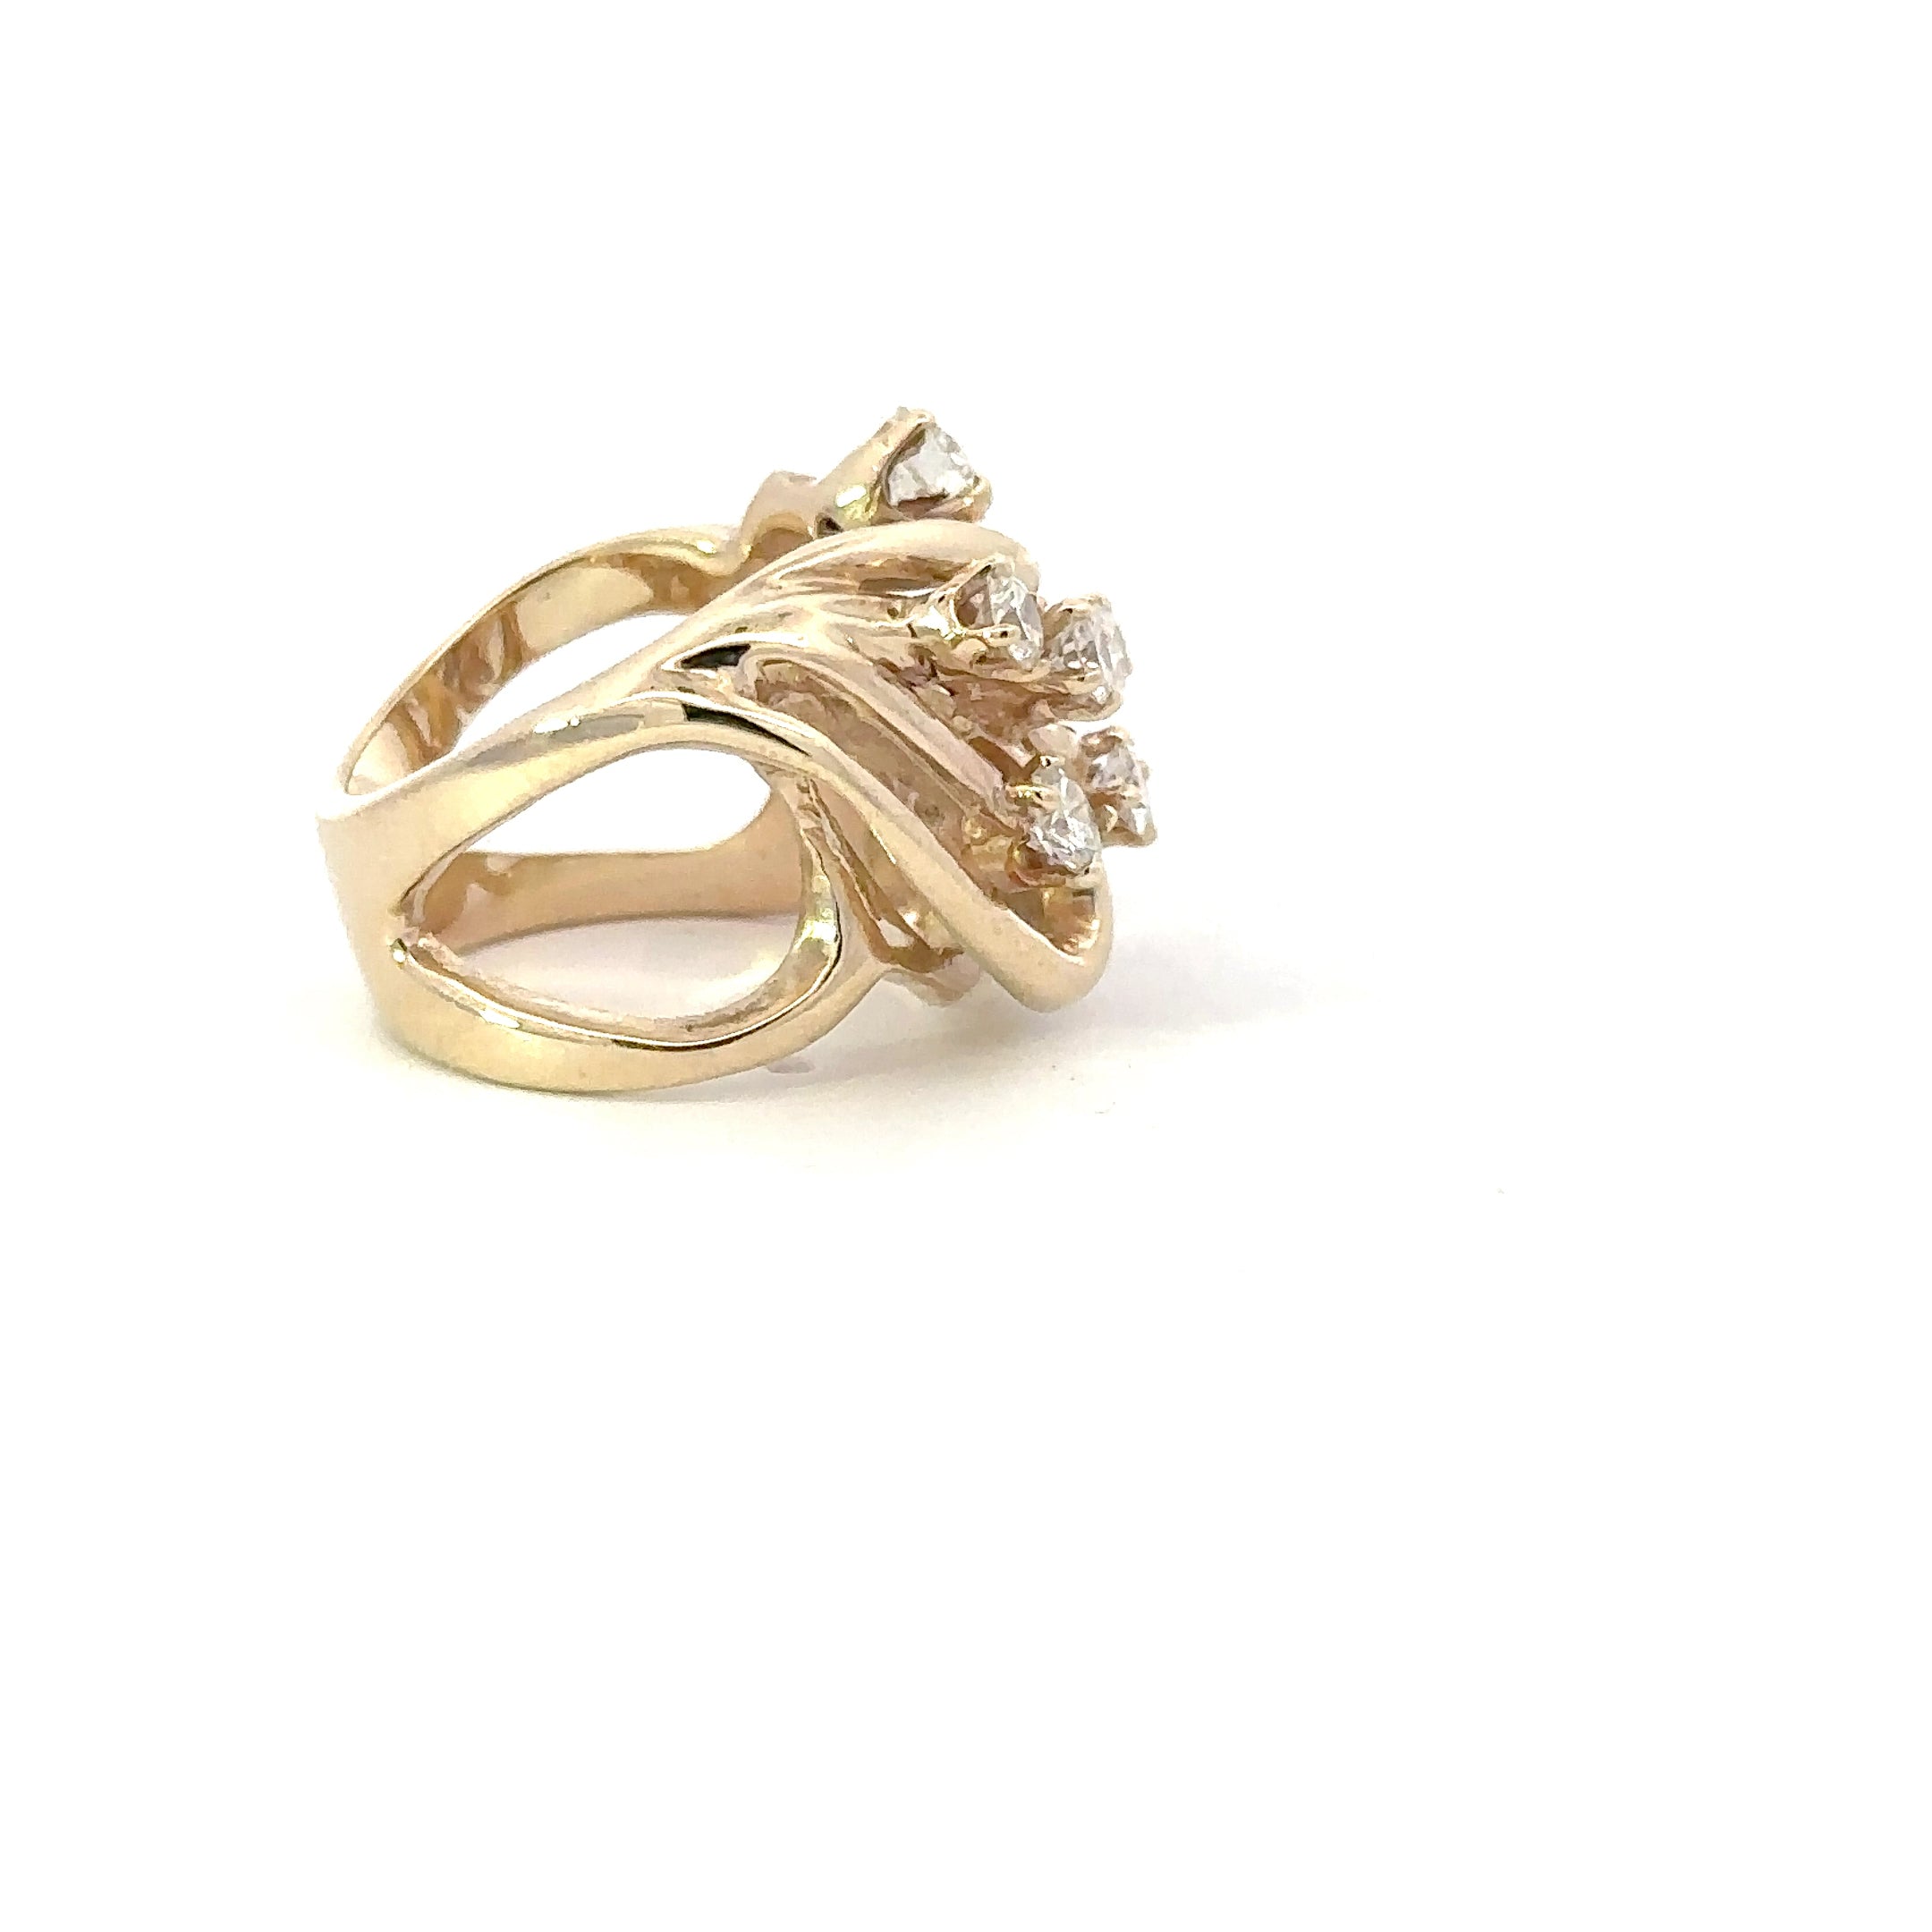 14KT Yellow and Diamond Ring